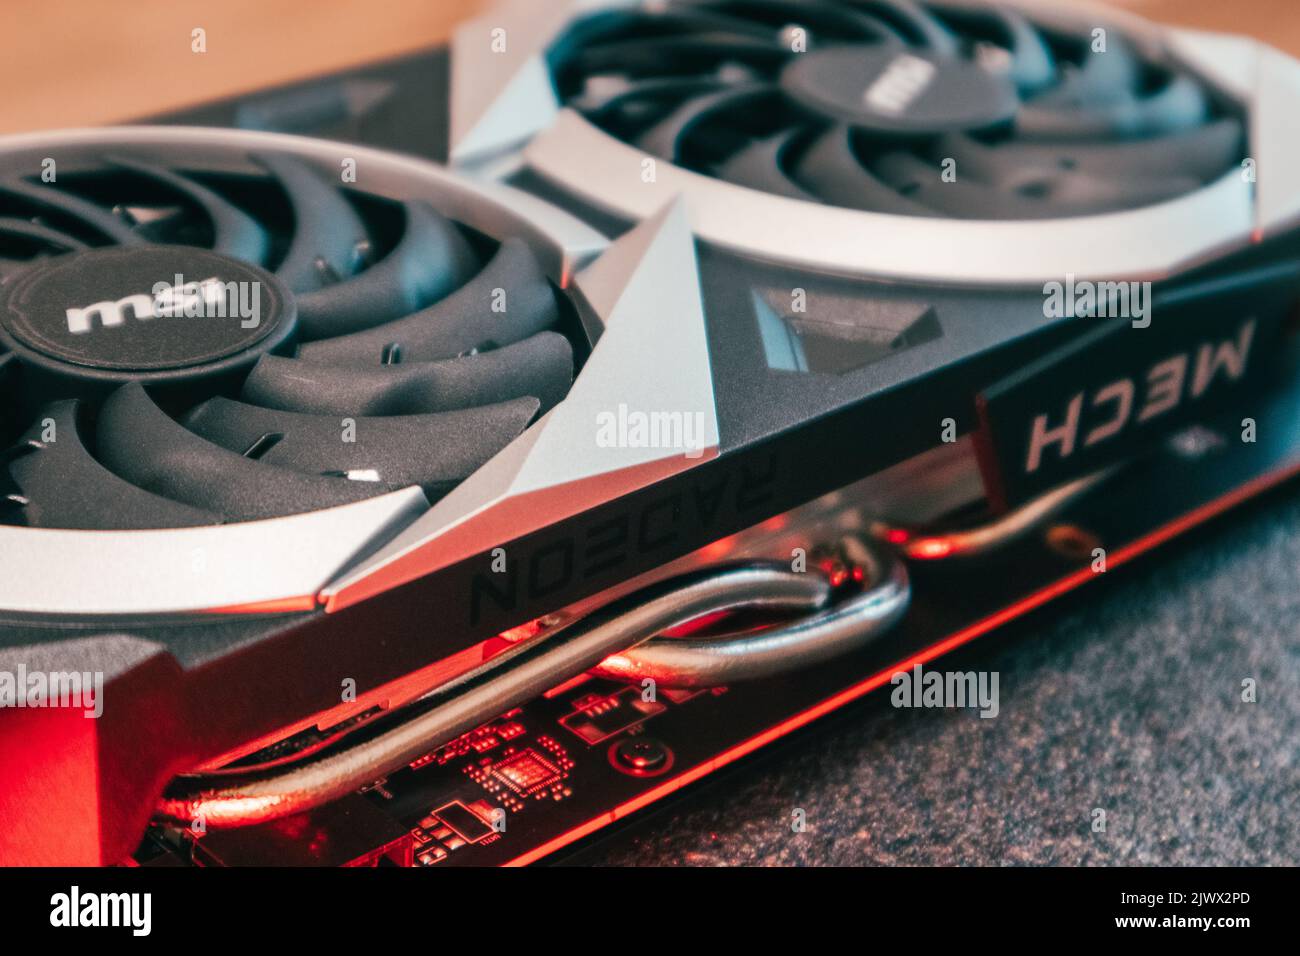 Kyiv, Ukraine - August 19, 2022: MSI MECH 2X graphics card with AMD Radeon chipset in red light, PC hardware details close-up Stock Photo